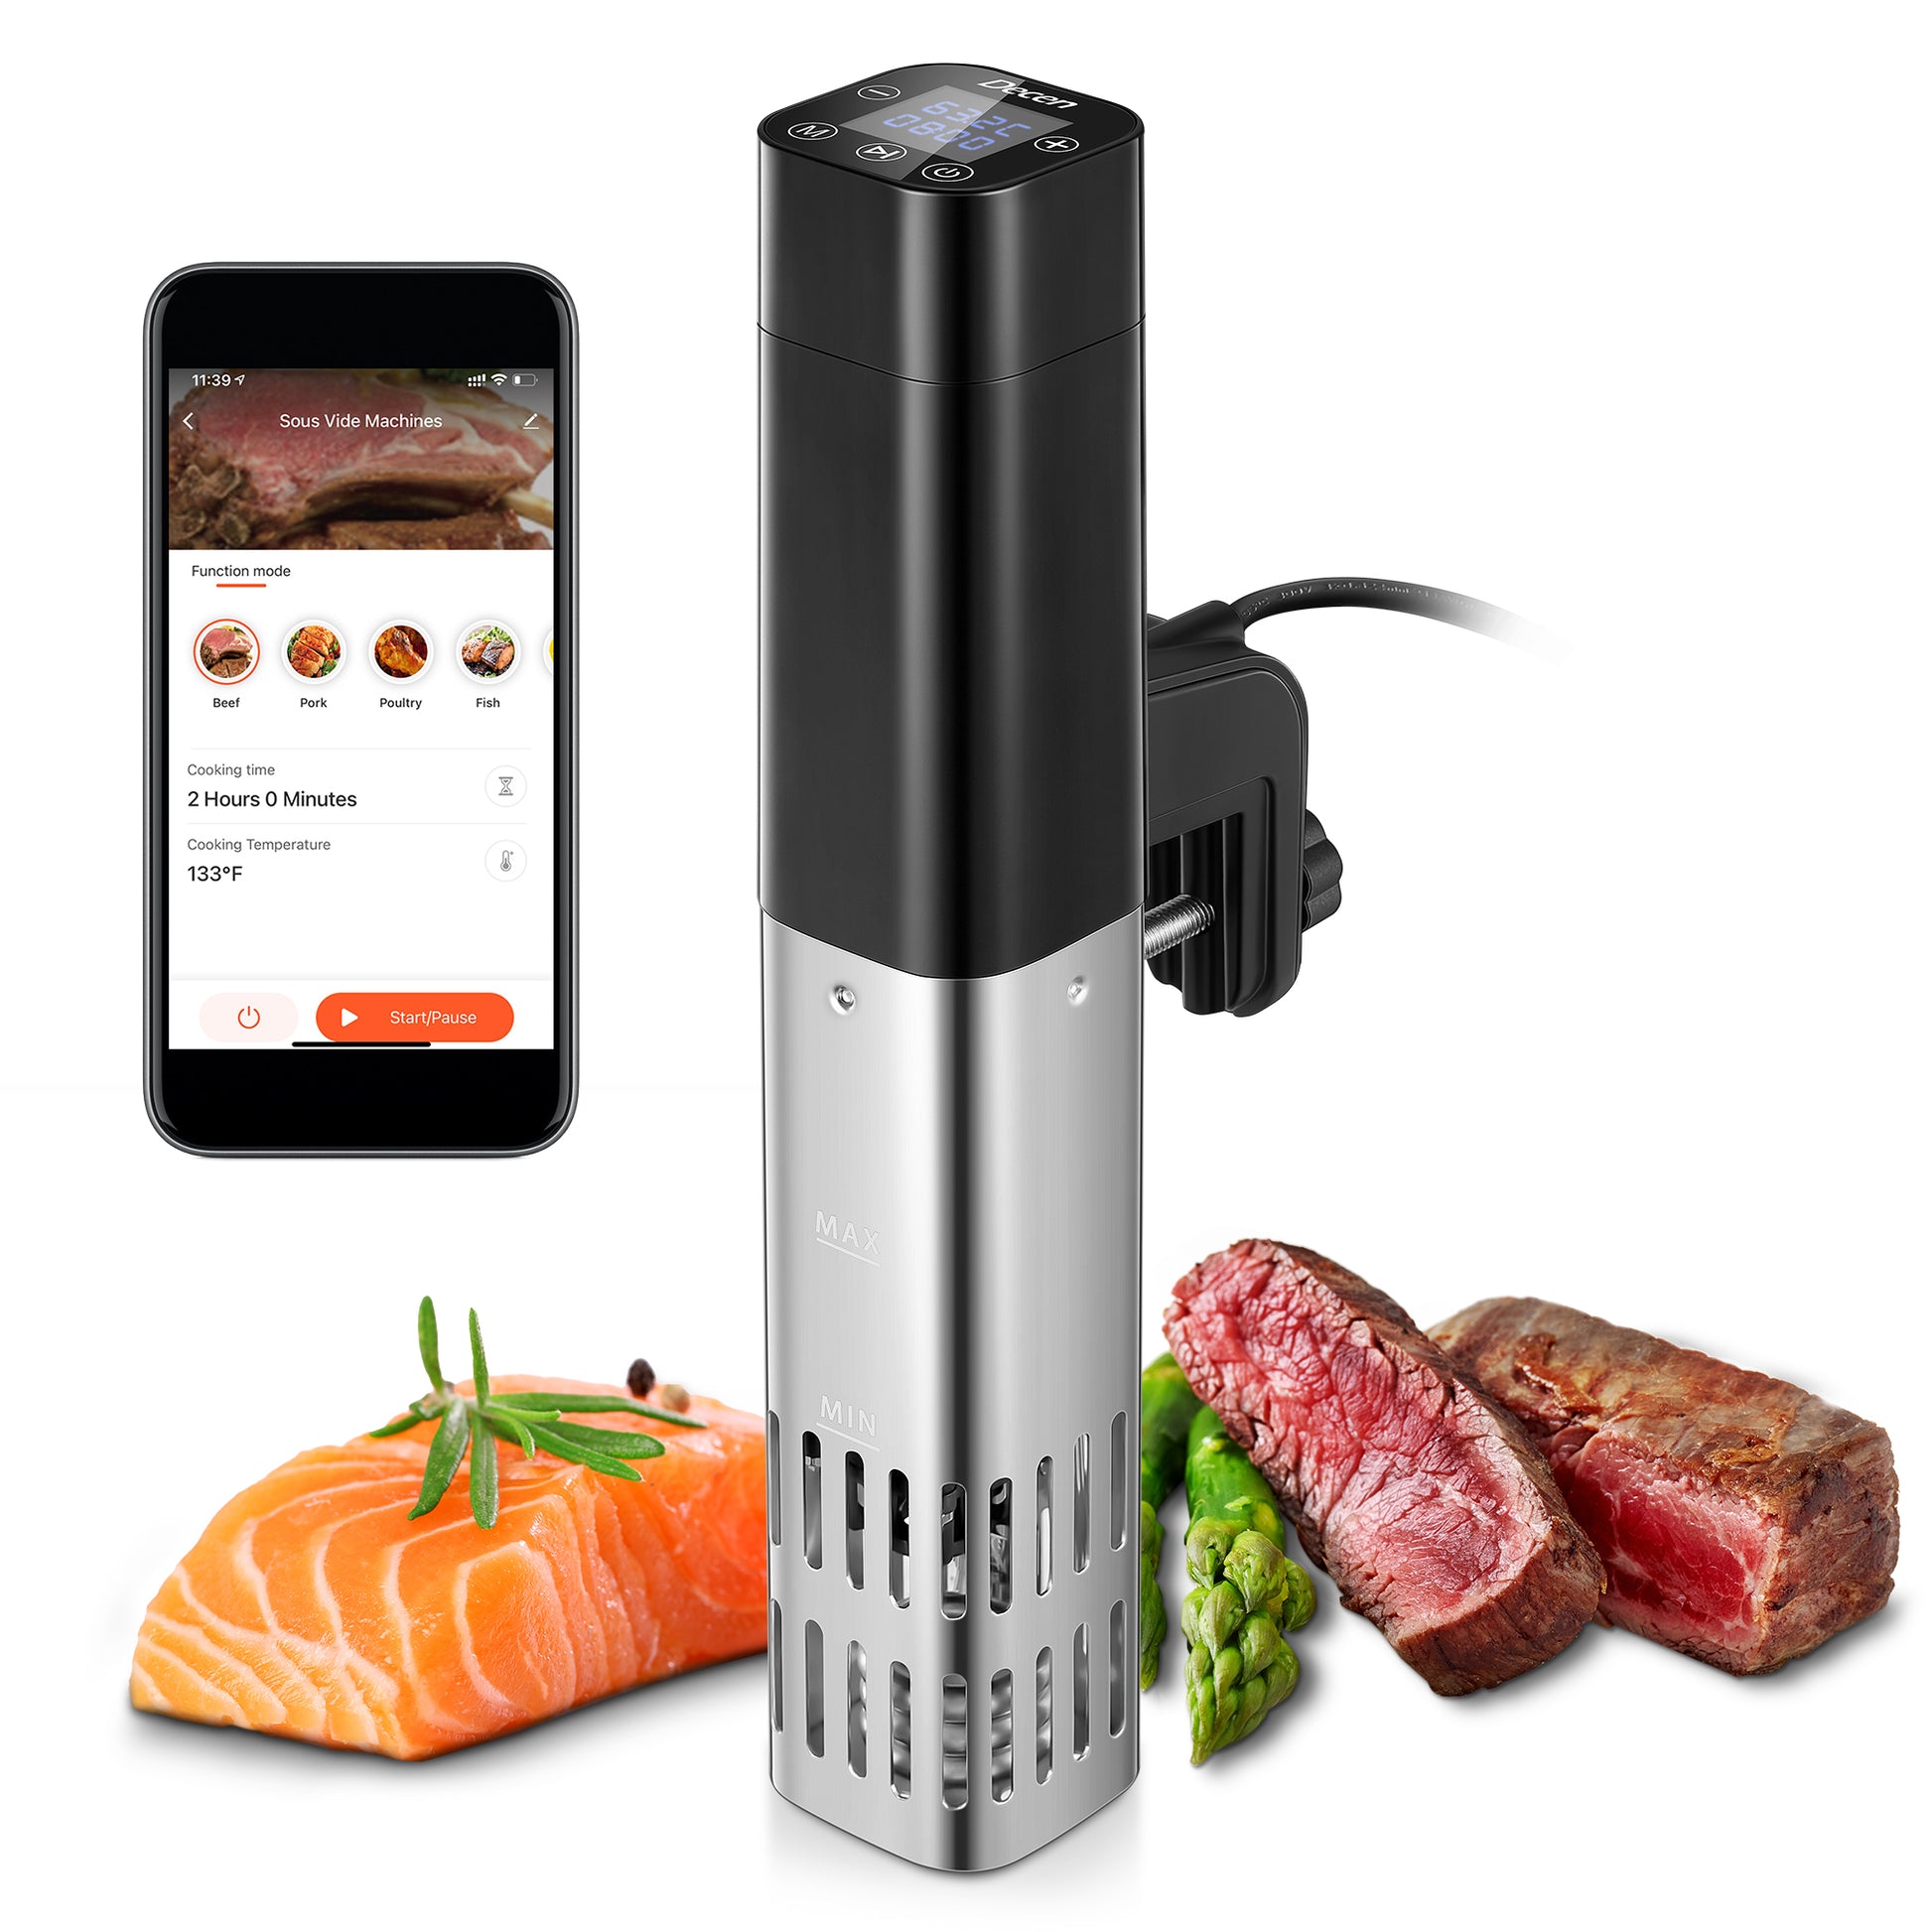 VEVOR Sous Vide Machine 1200W Sous Vide Cooker 86-203 °F Immersion Circulator Temperature and Time Digital Display Control Ipx7 Waterproof Fast